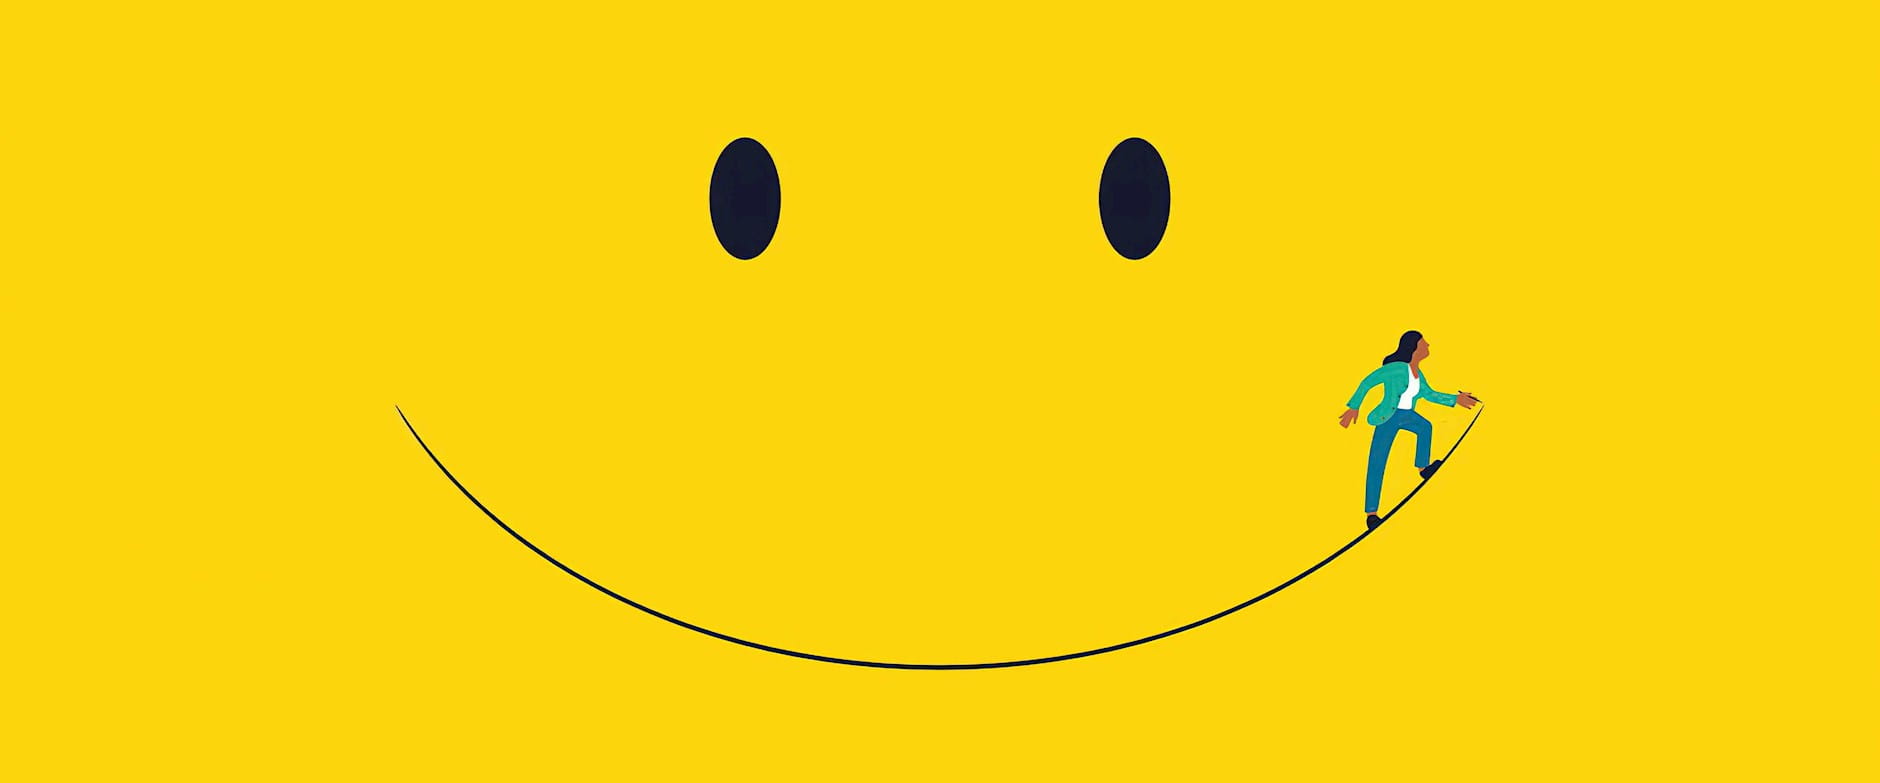 Yellow smiley face with a person drawing the smile